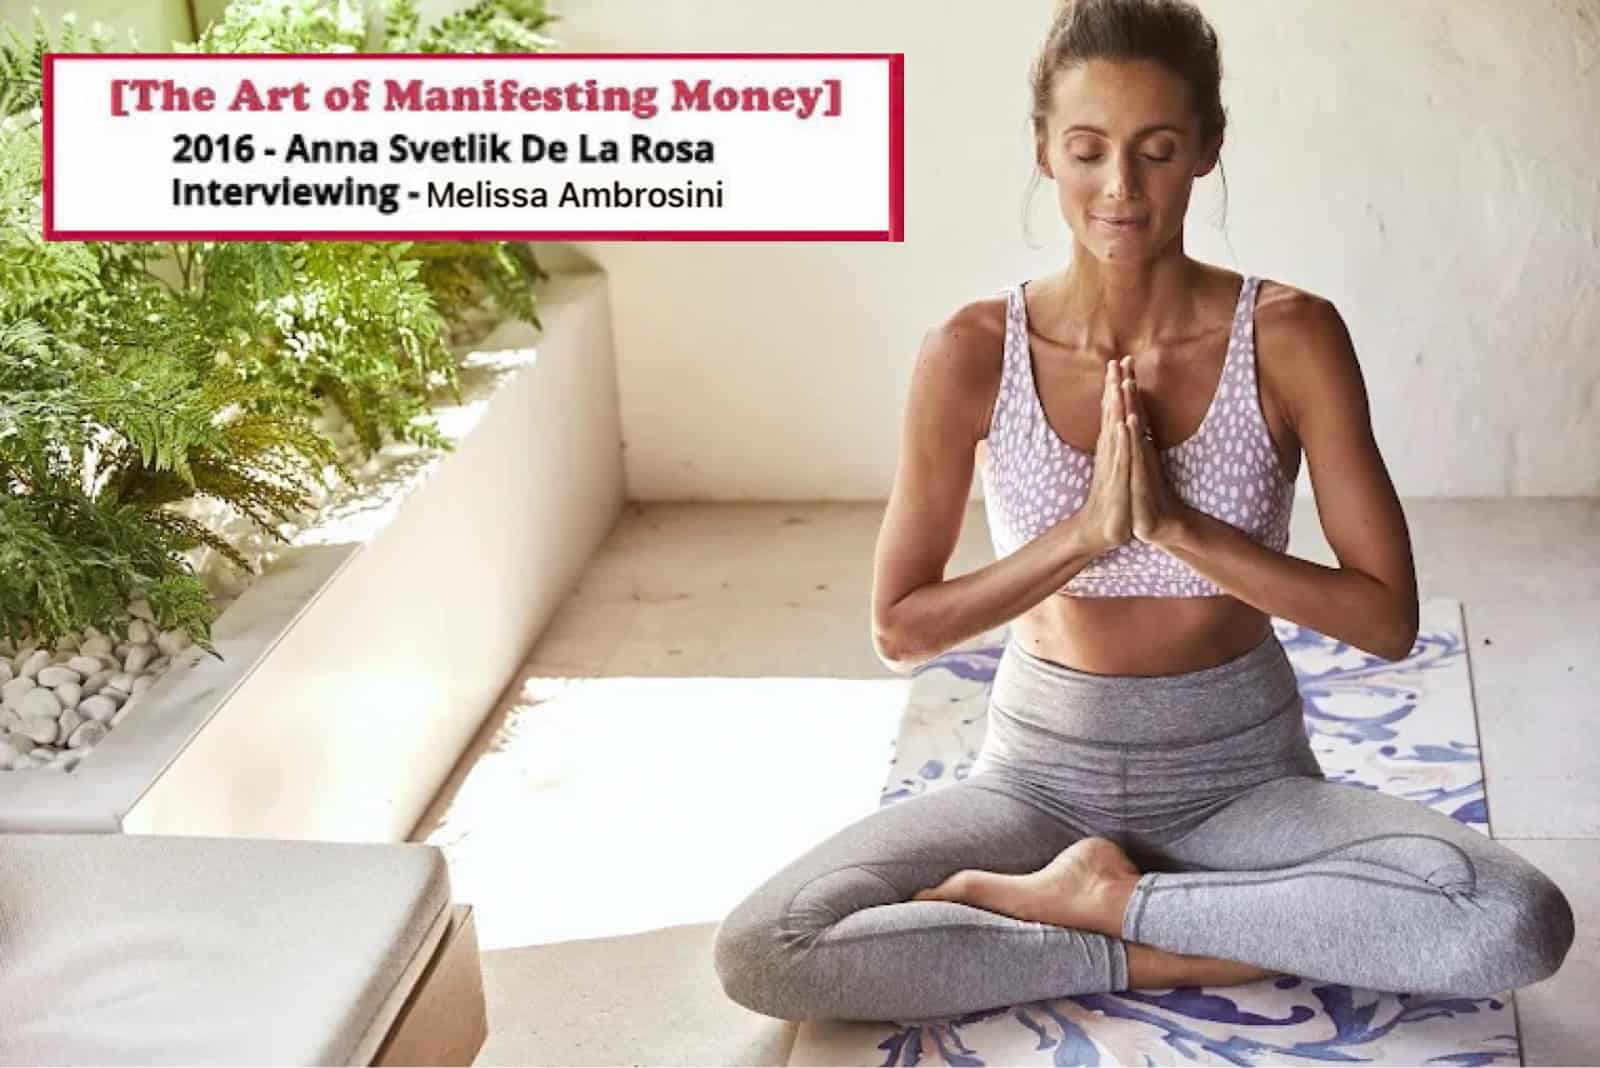 The Art of Manifesting Money 2016 Interview Series